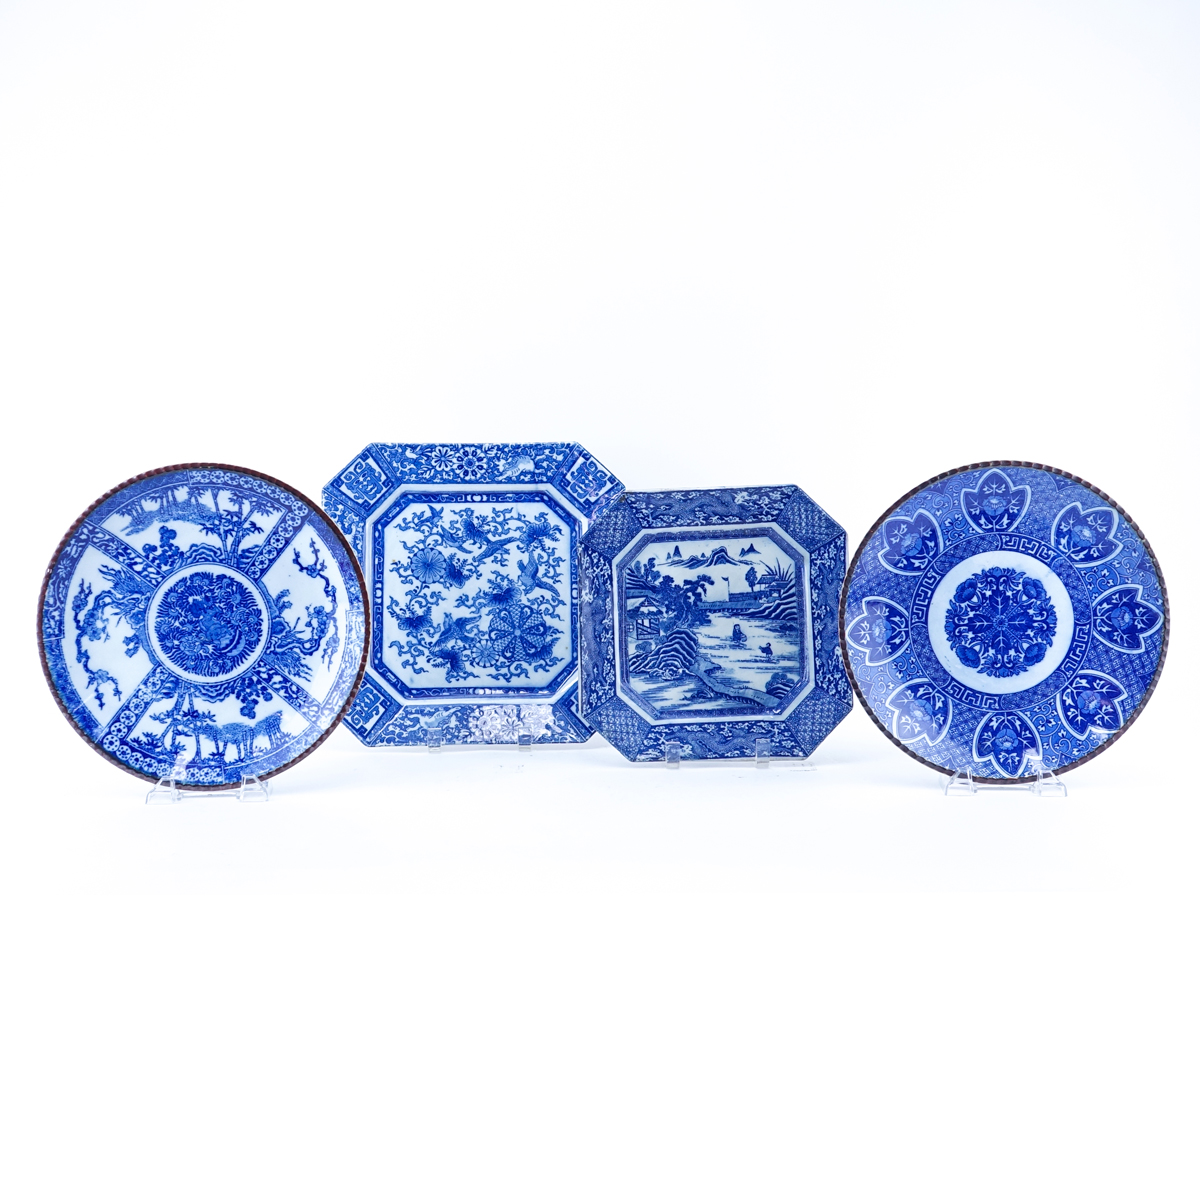 Four (4) Chinese Blue & White Pottery Chargers. Unsigned.